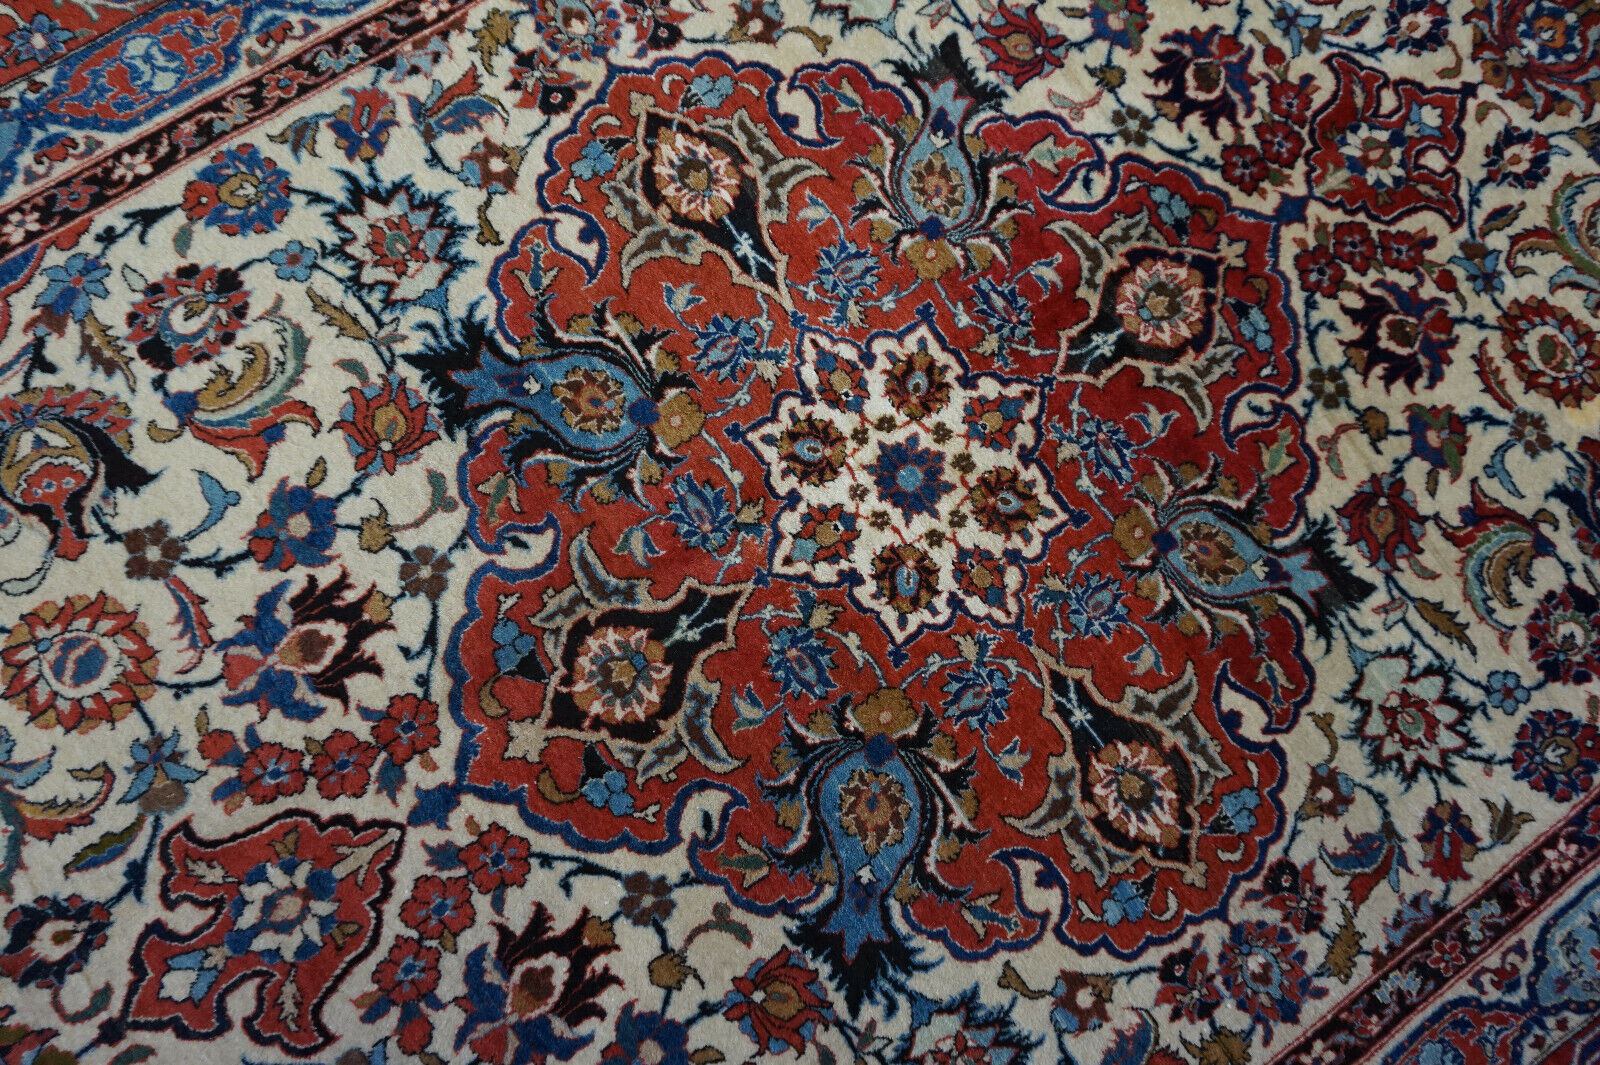 Side view of the Handmade Antique Persian Style Isfahan Rug demonstrating its fine weave structure